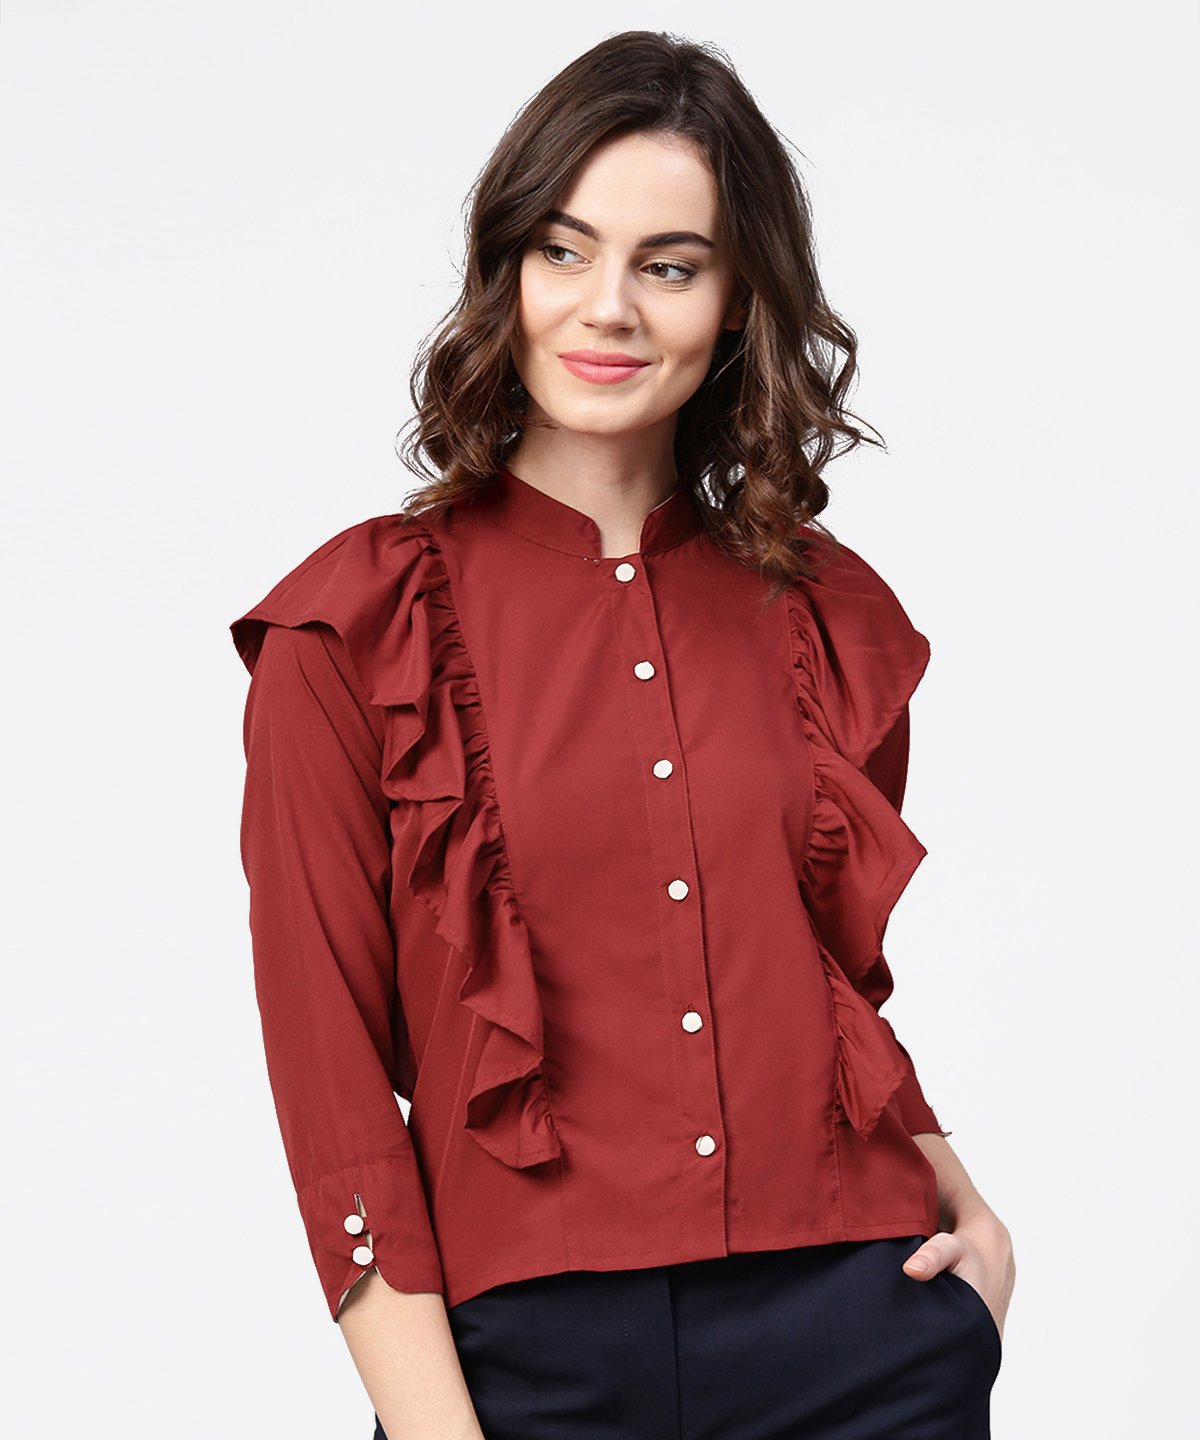 Women's Maroon Full Sleeve Crepe Tops With Layred Design At Front - Nayo Clothing